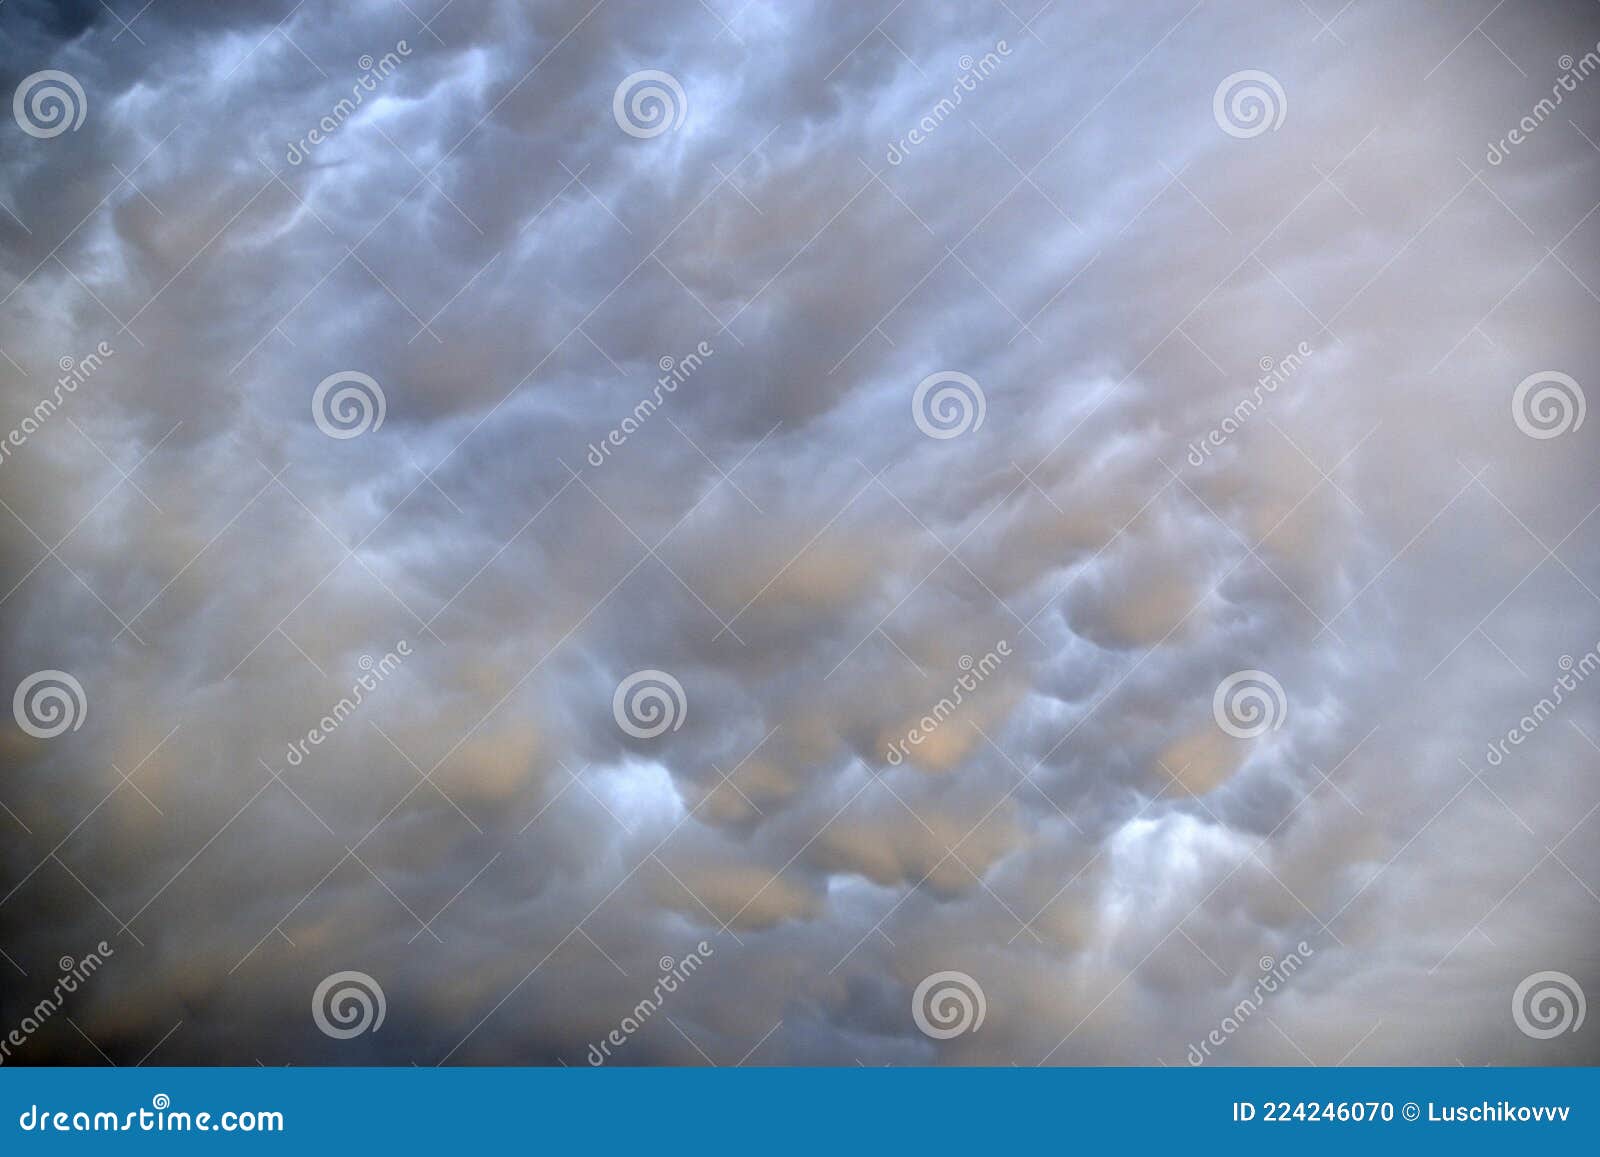 blue background of blue storm clouds summer thunderstorms mammatus vymeobraznye clouds